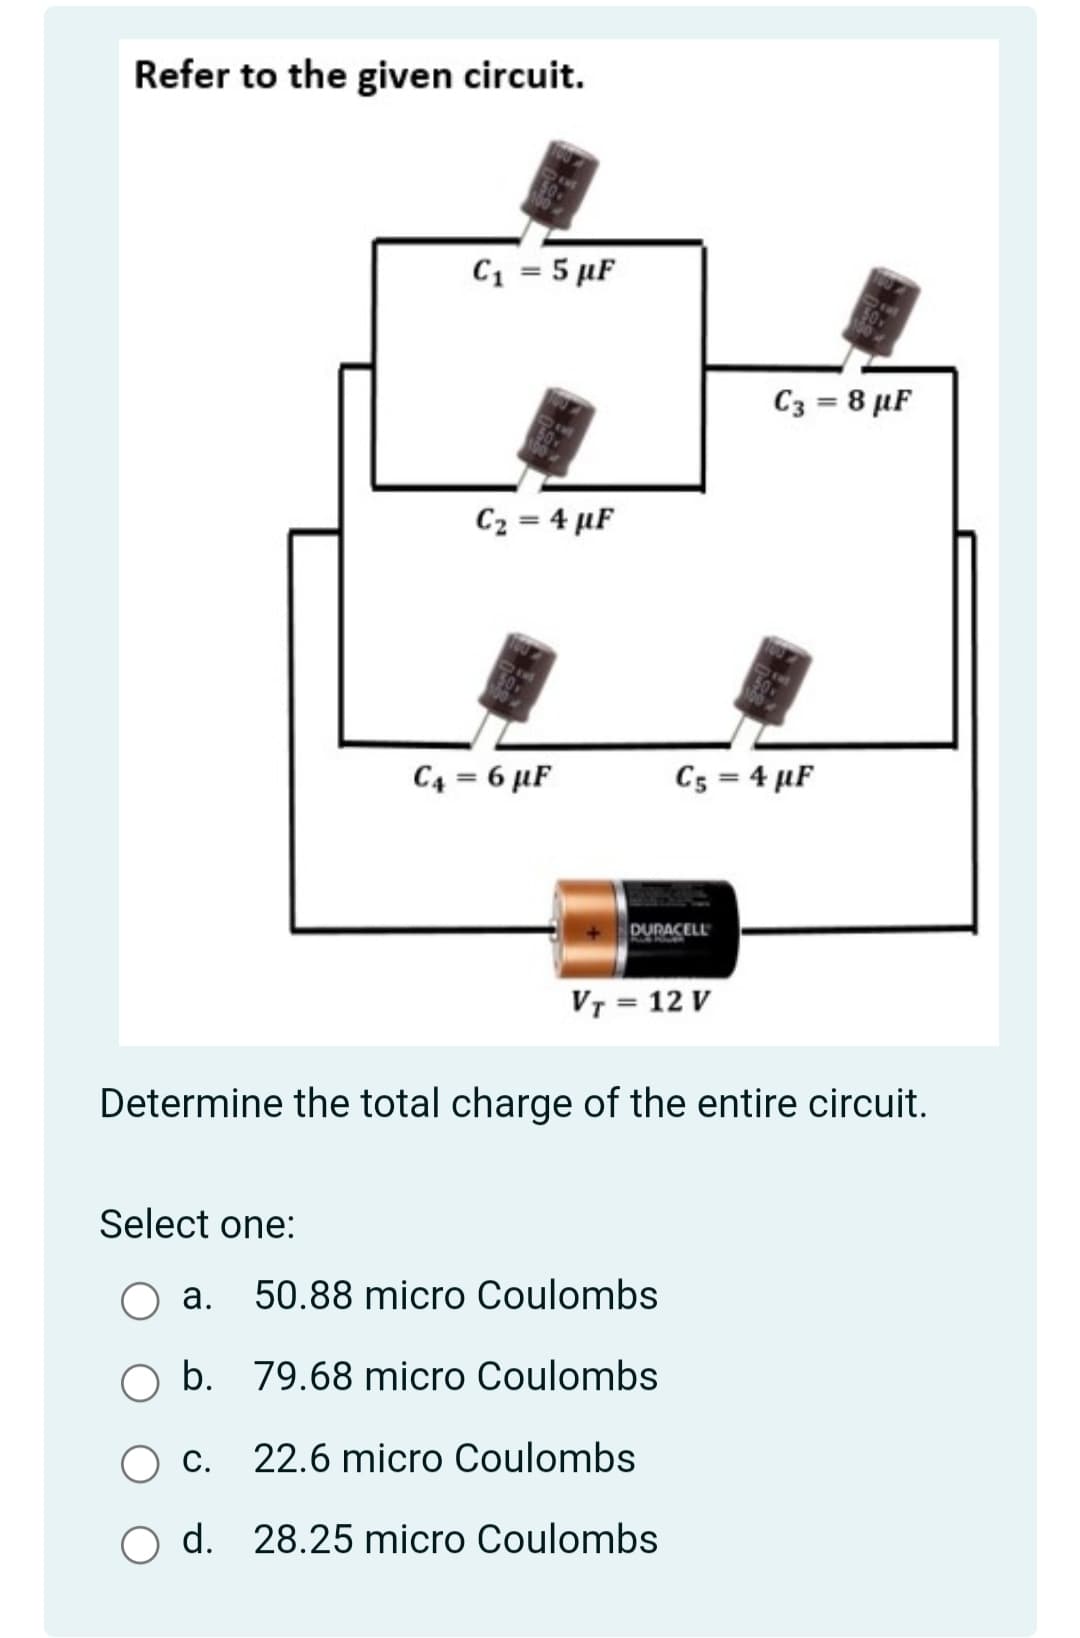 Refer to the given circuit.
C1 = 5 µF
C3 = 8 µF
C2 = 4 µF
C4 = 6 µF
C5 = 4 µF
DURACELL
VT = 12 V
Determine the total charge of the entire circuit.
Select one:
а.
50.88 micro Coulombs
O b. 79.68 micro Coulombs
С.
22.6 micro Coulombs
d. 28.25 micro Coulombs
